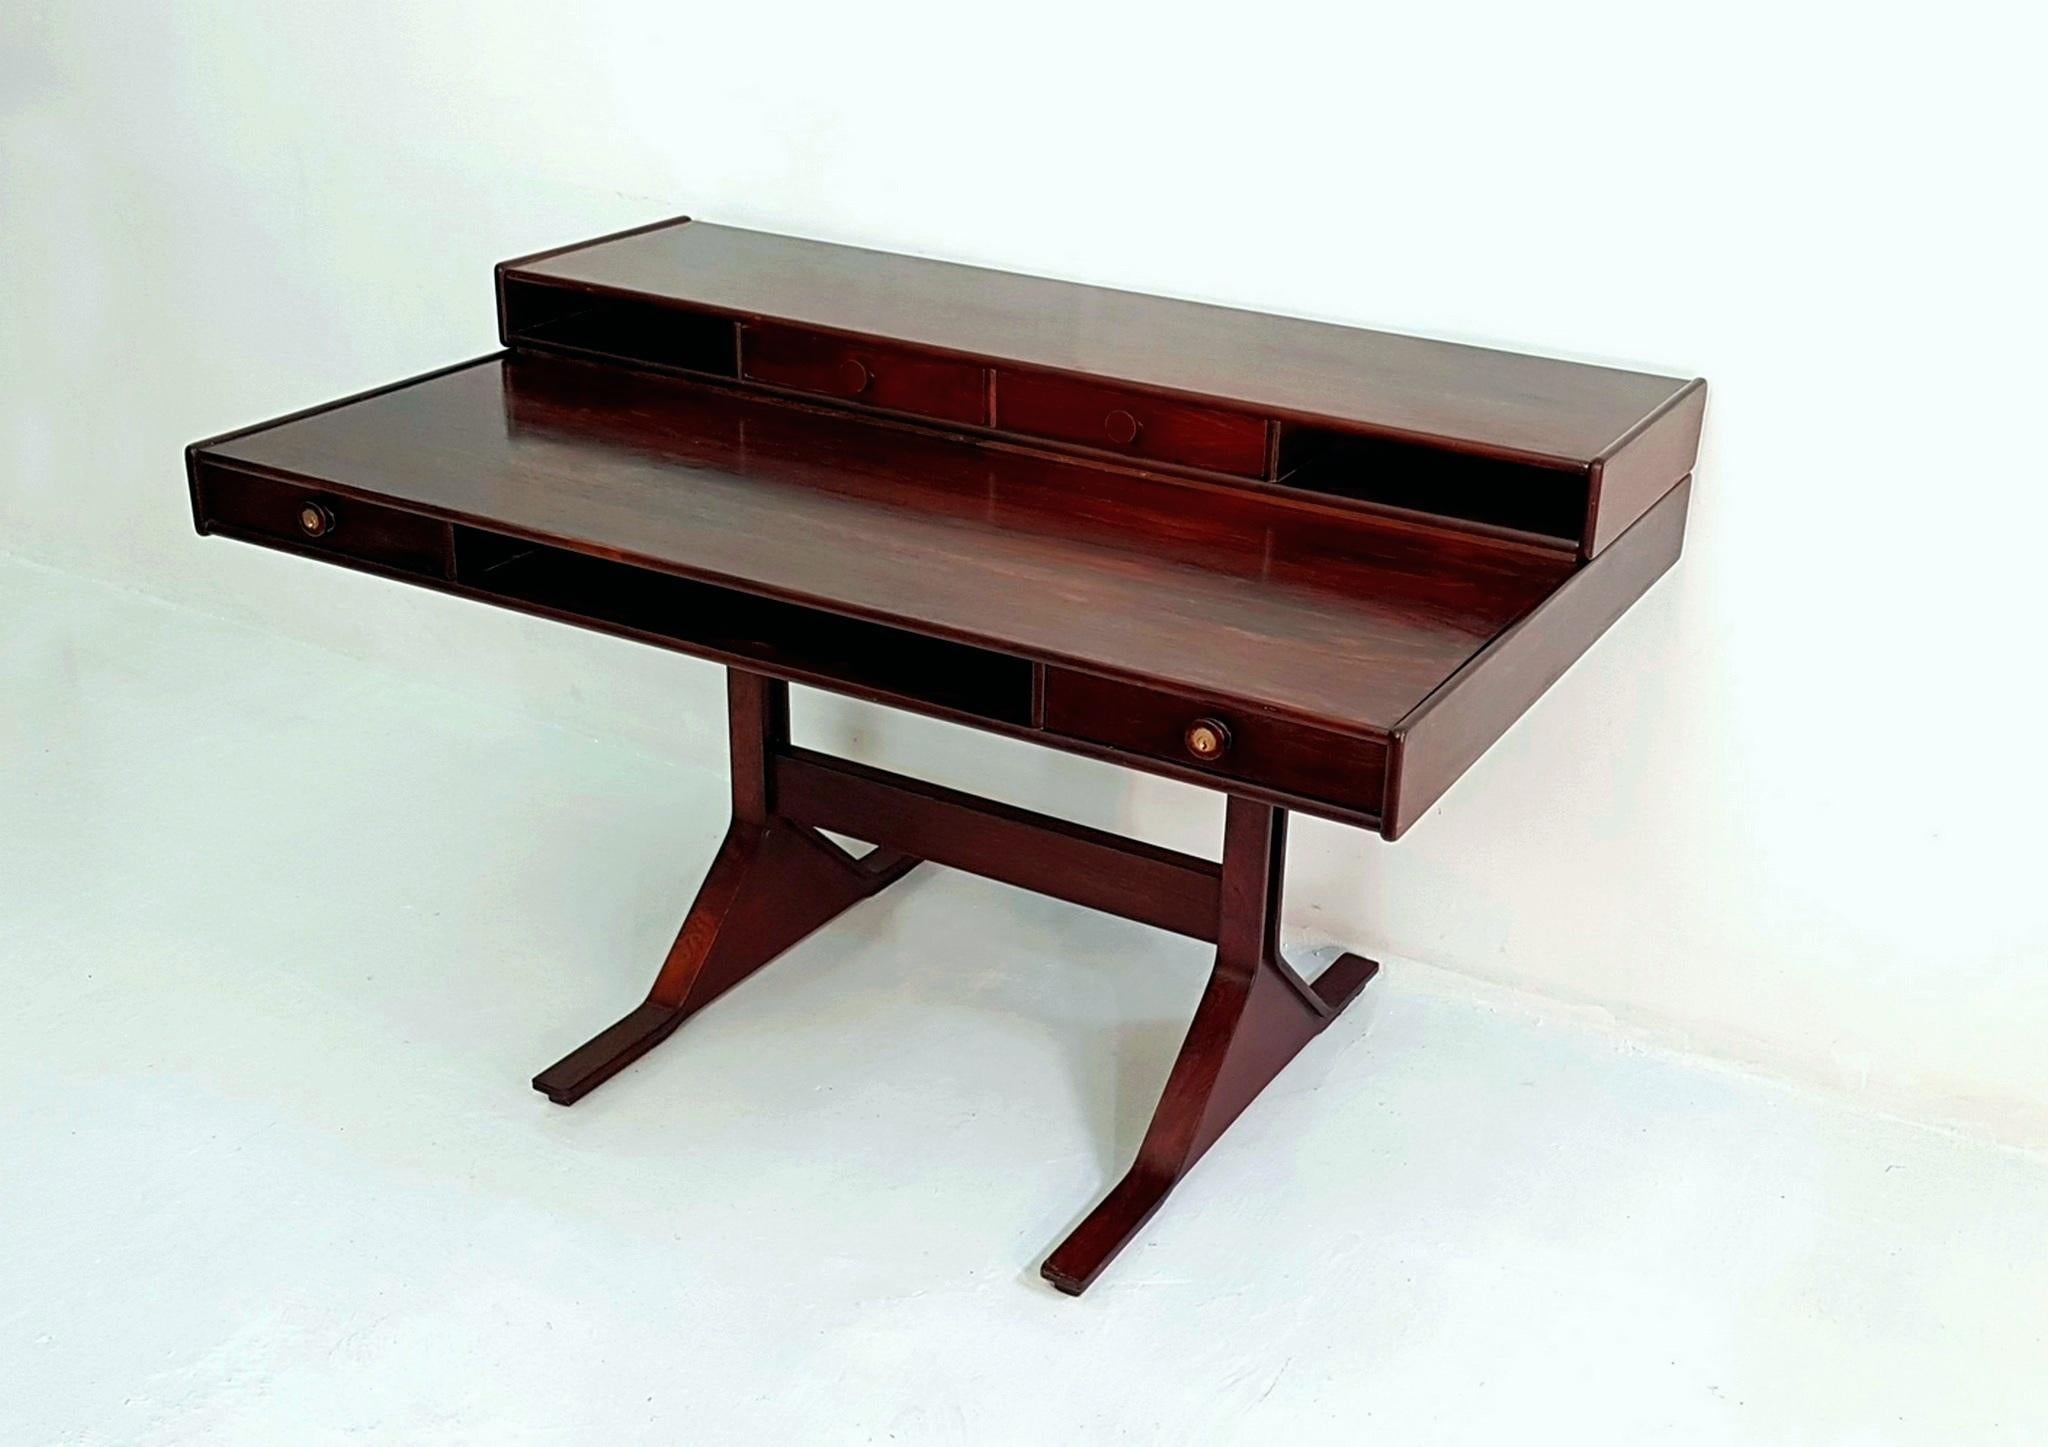 Classic writing desk model 530 designed in 1957 by Gianfranco Frattini and manufactured by Bernini, Milan, Italy 1963. It is even stamped with the year in the back of the drawers (see pic). The original sticker from Bernini is also intact. It has 2